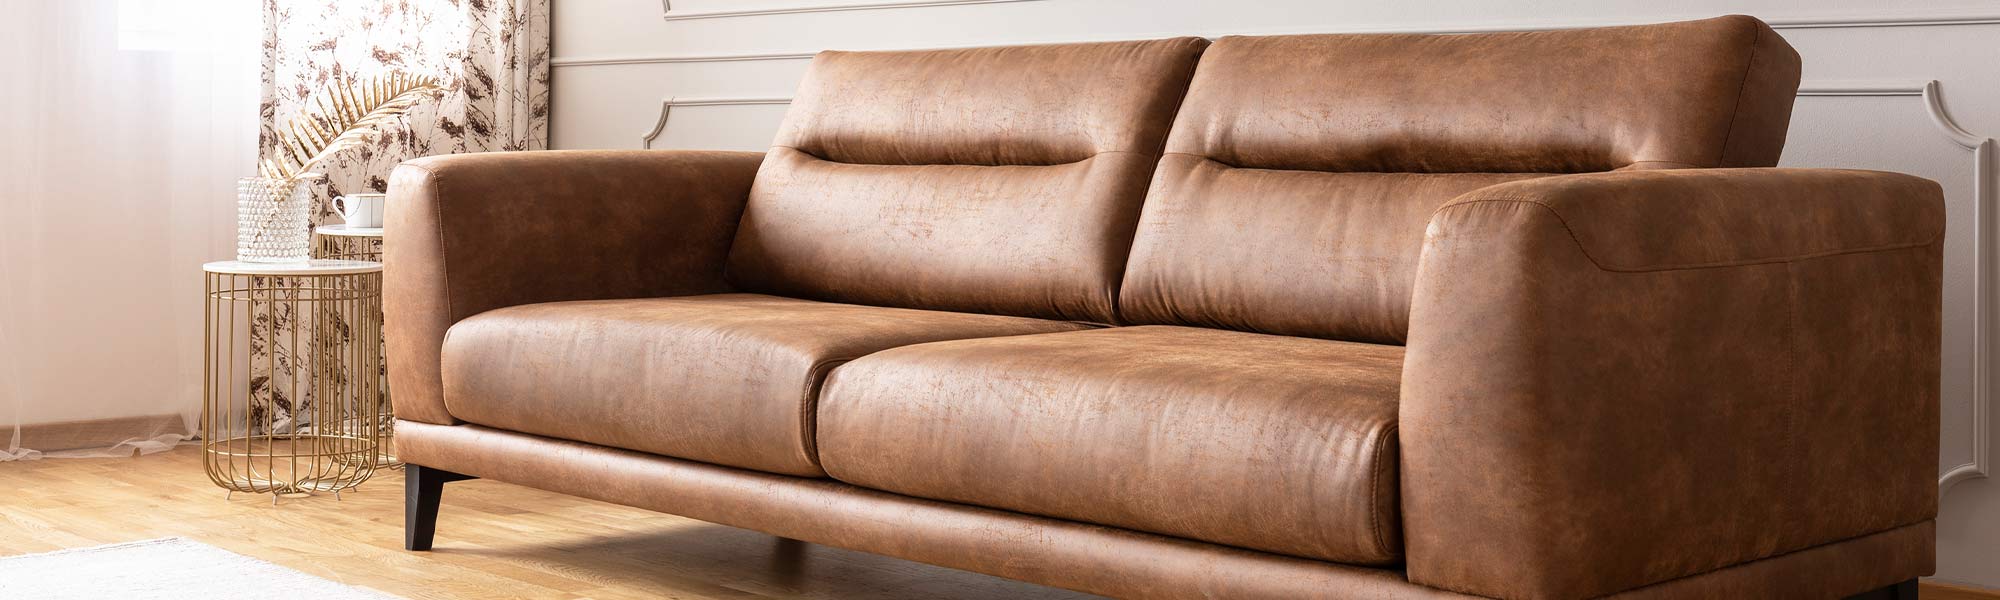 Leather Upholstery Cleaning Services in San Diego & Chula Vista by Hearth & Home Chem-Dry